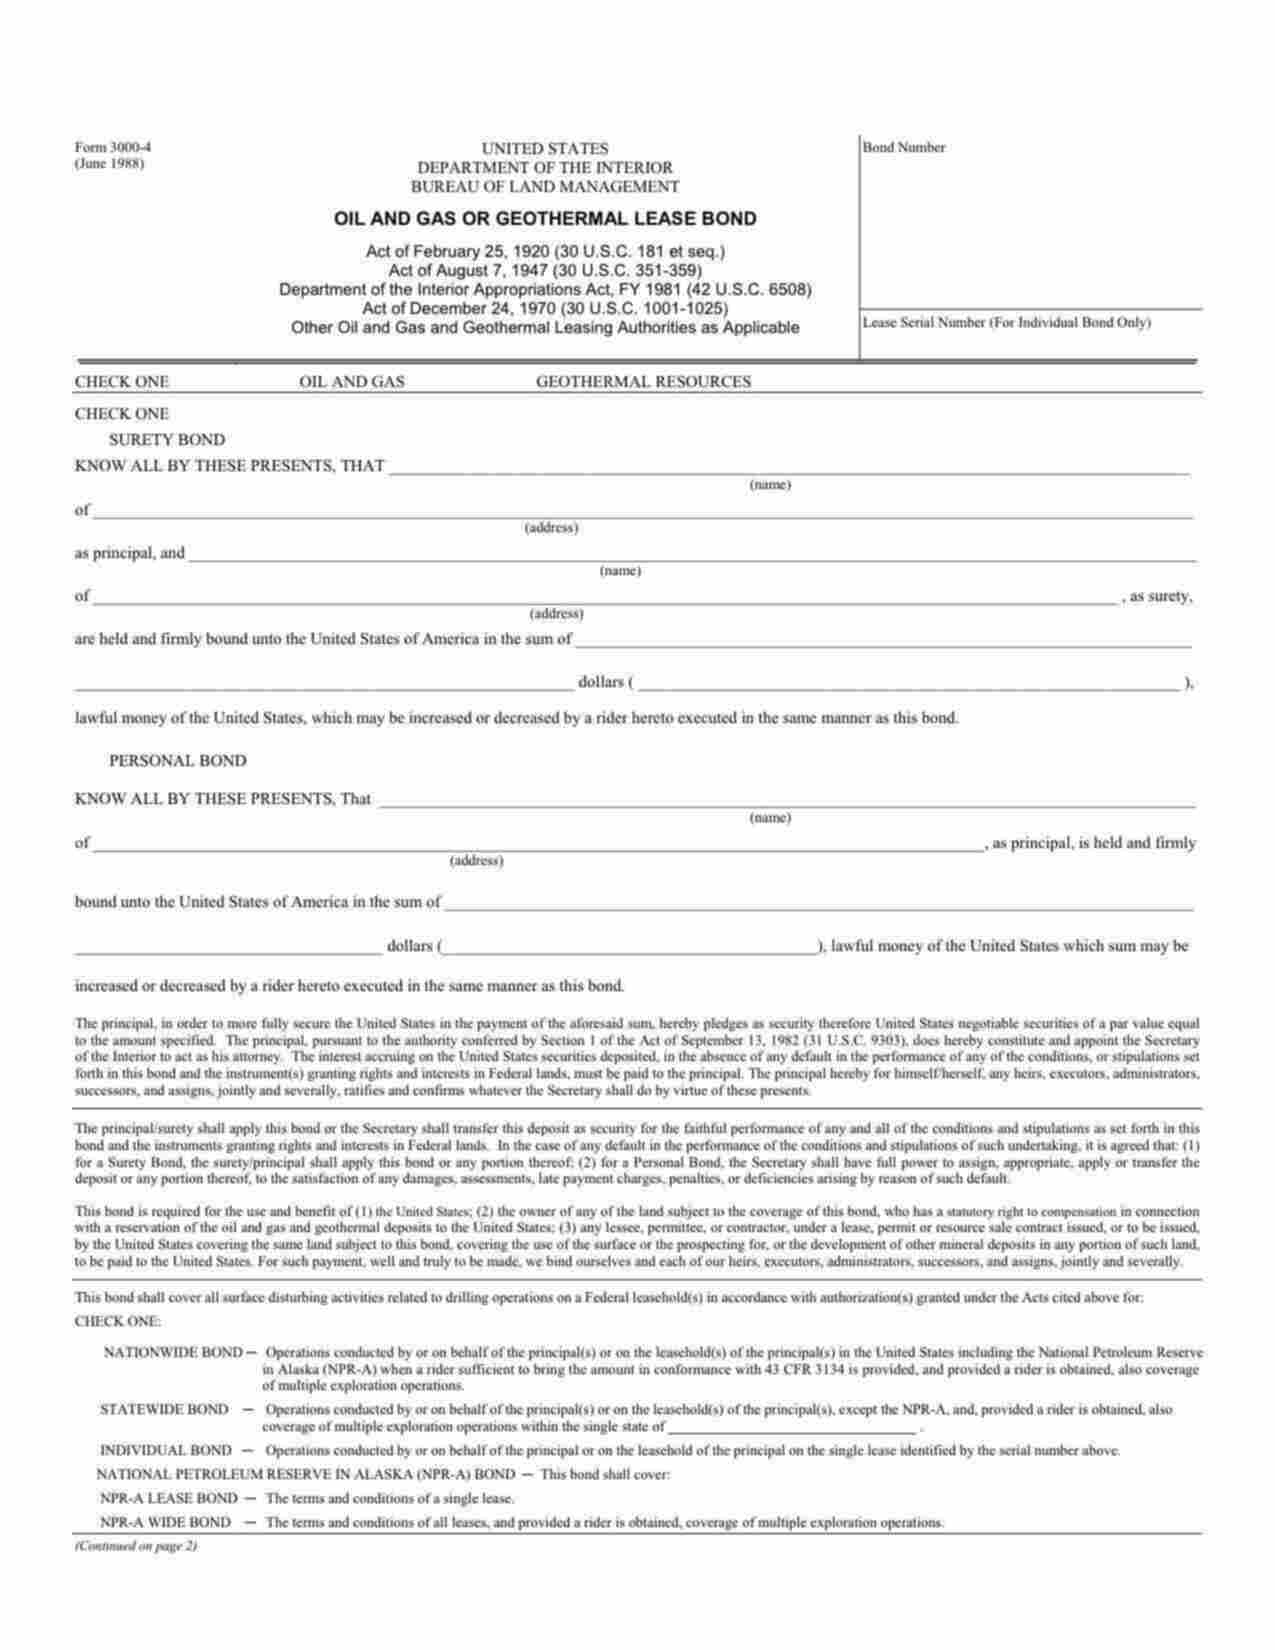 Federal Oil and Gas Lease Bond Form